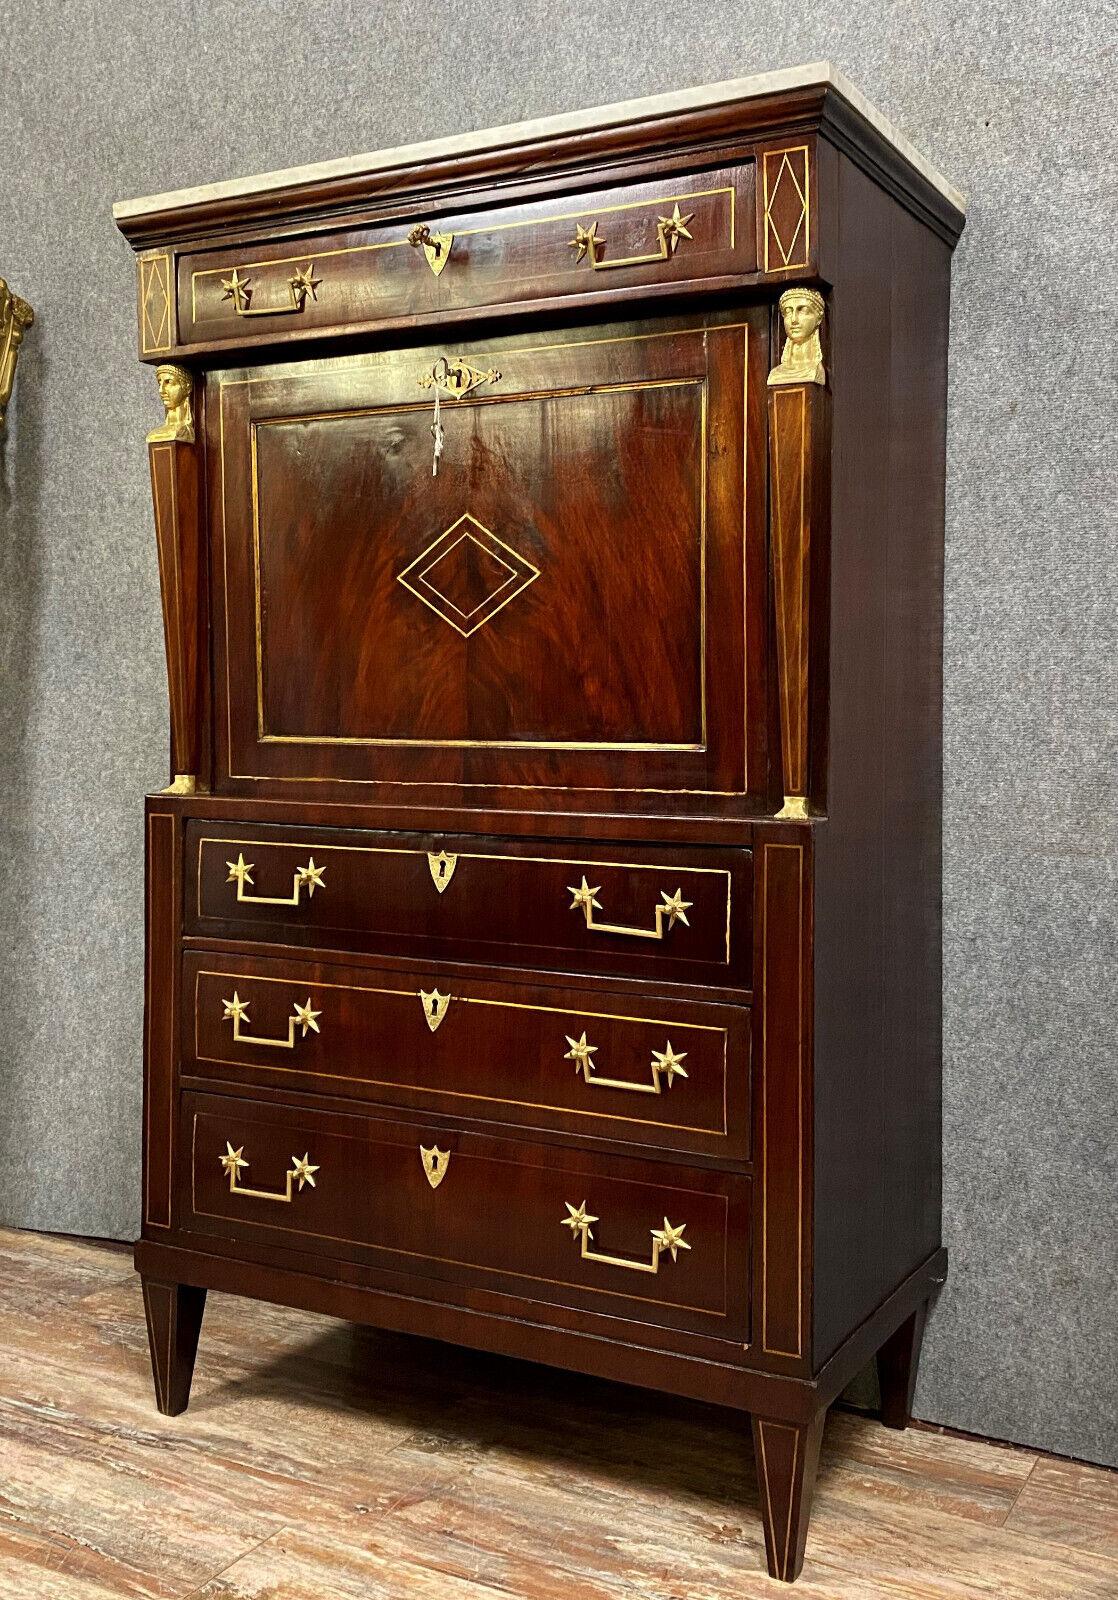 Early 19th Century Exceptional Consulate Period Mahogany Secretary 1800s -1X42 For Sale